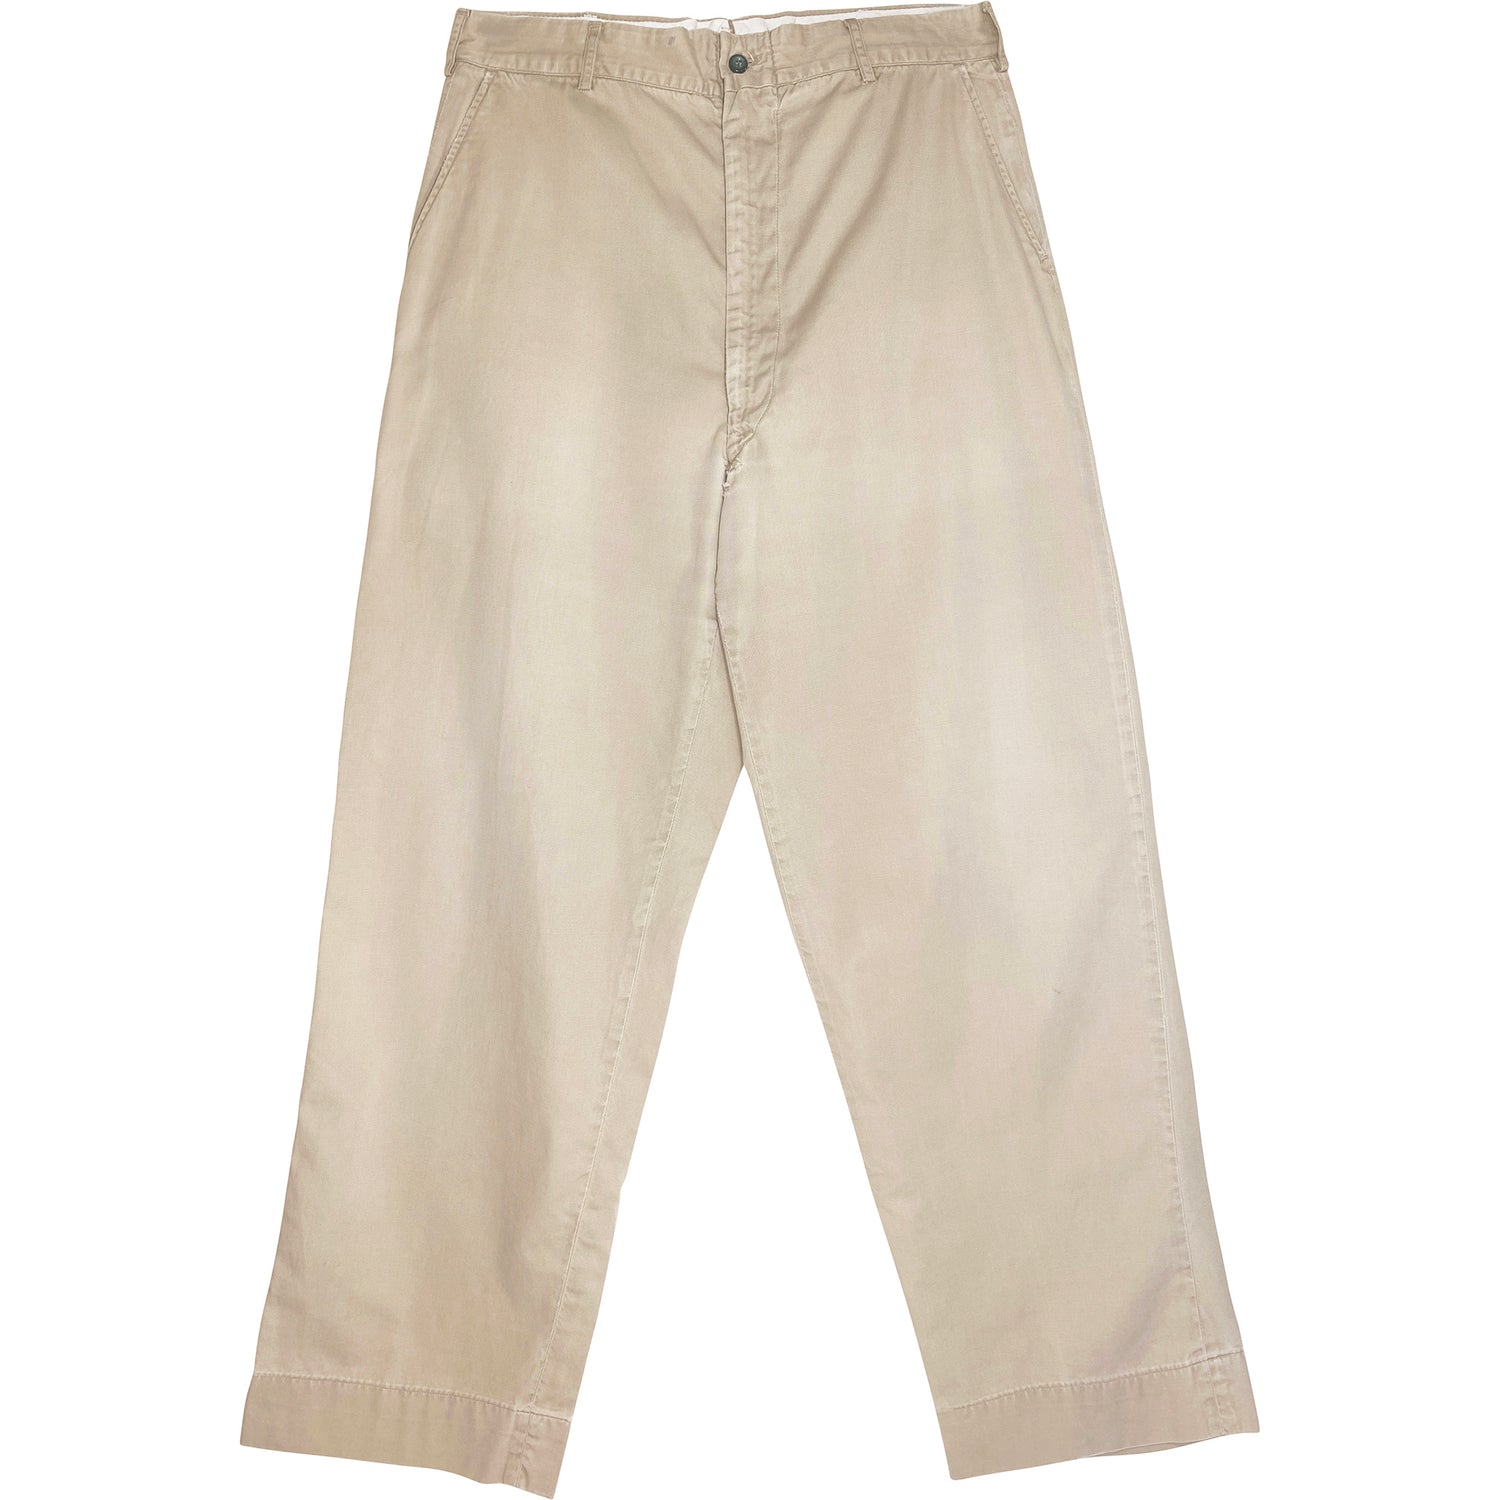 VINTAGE BEAT UP CHINOS - Size 31